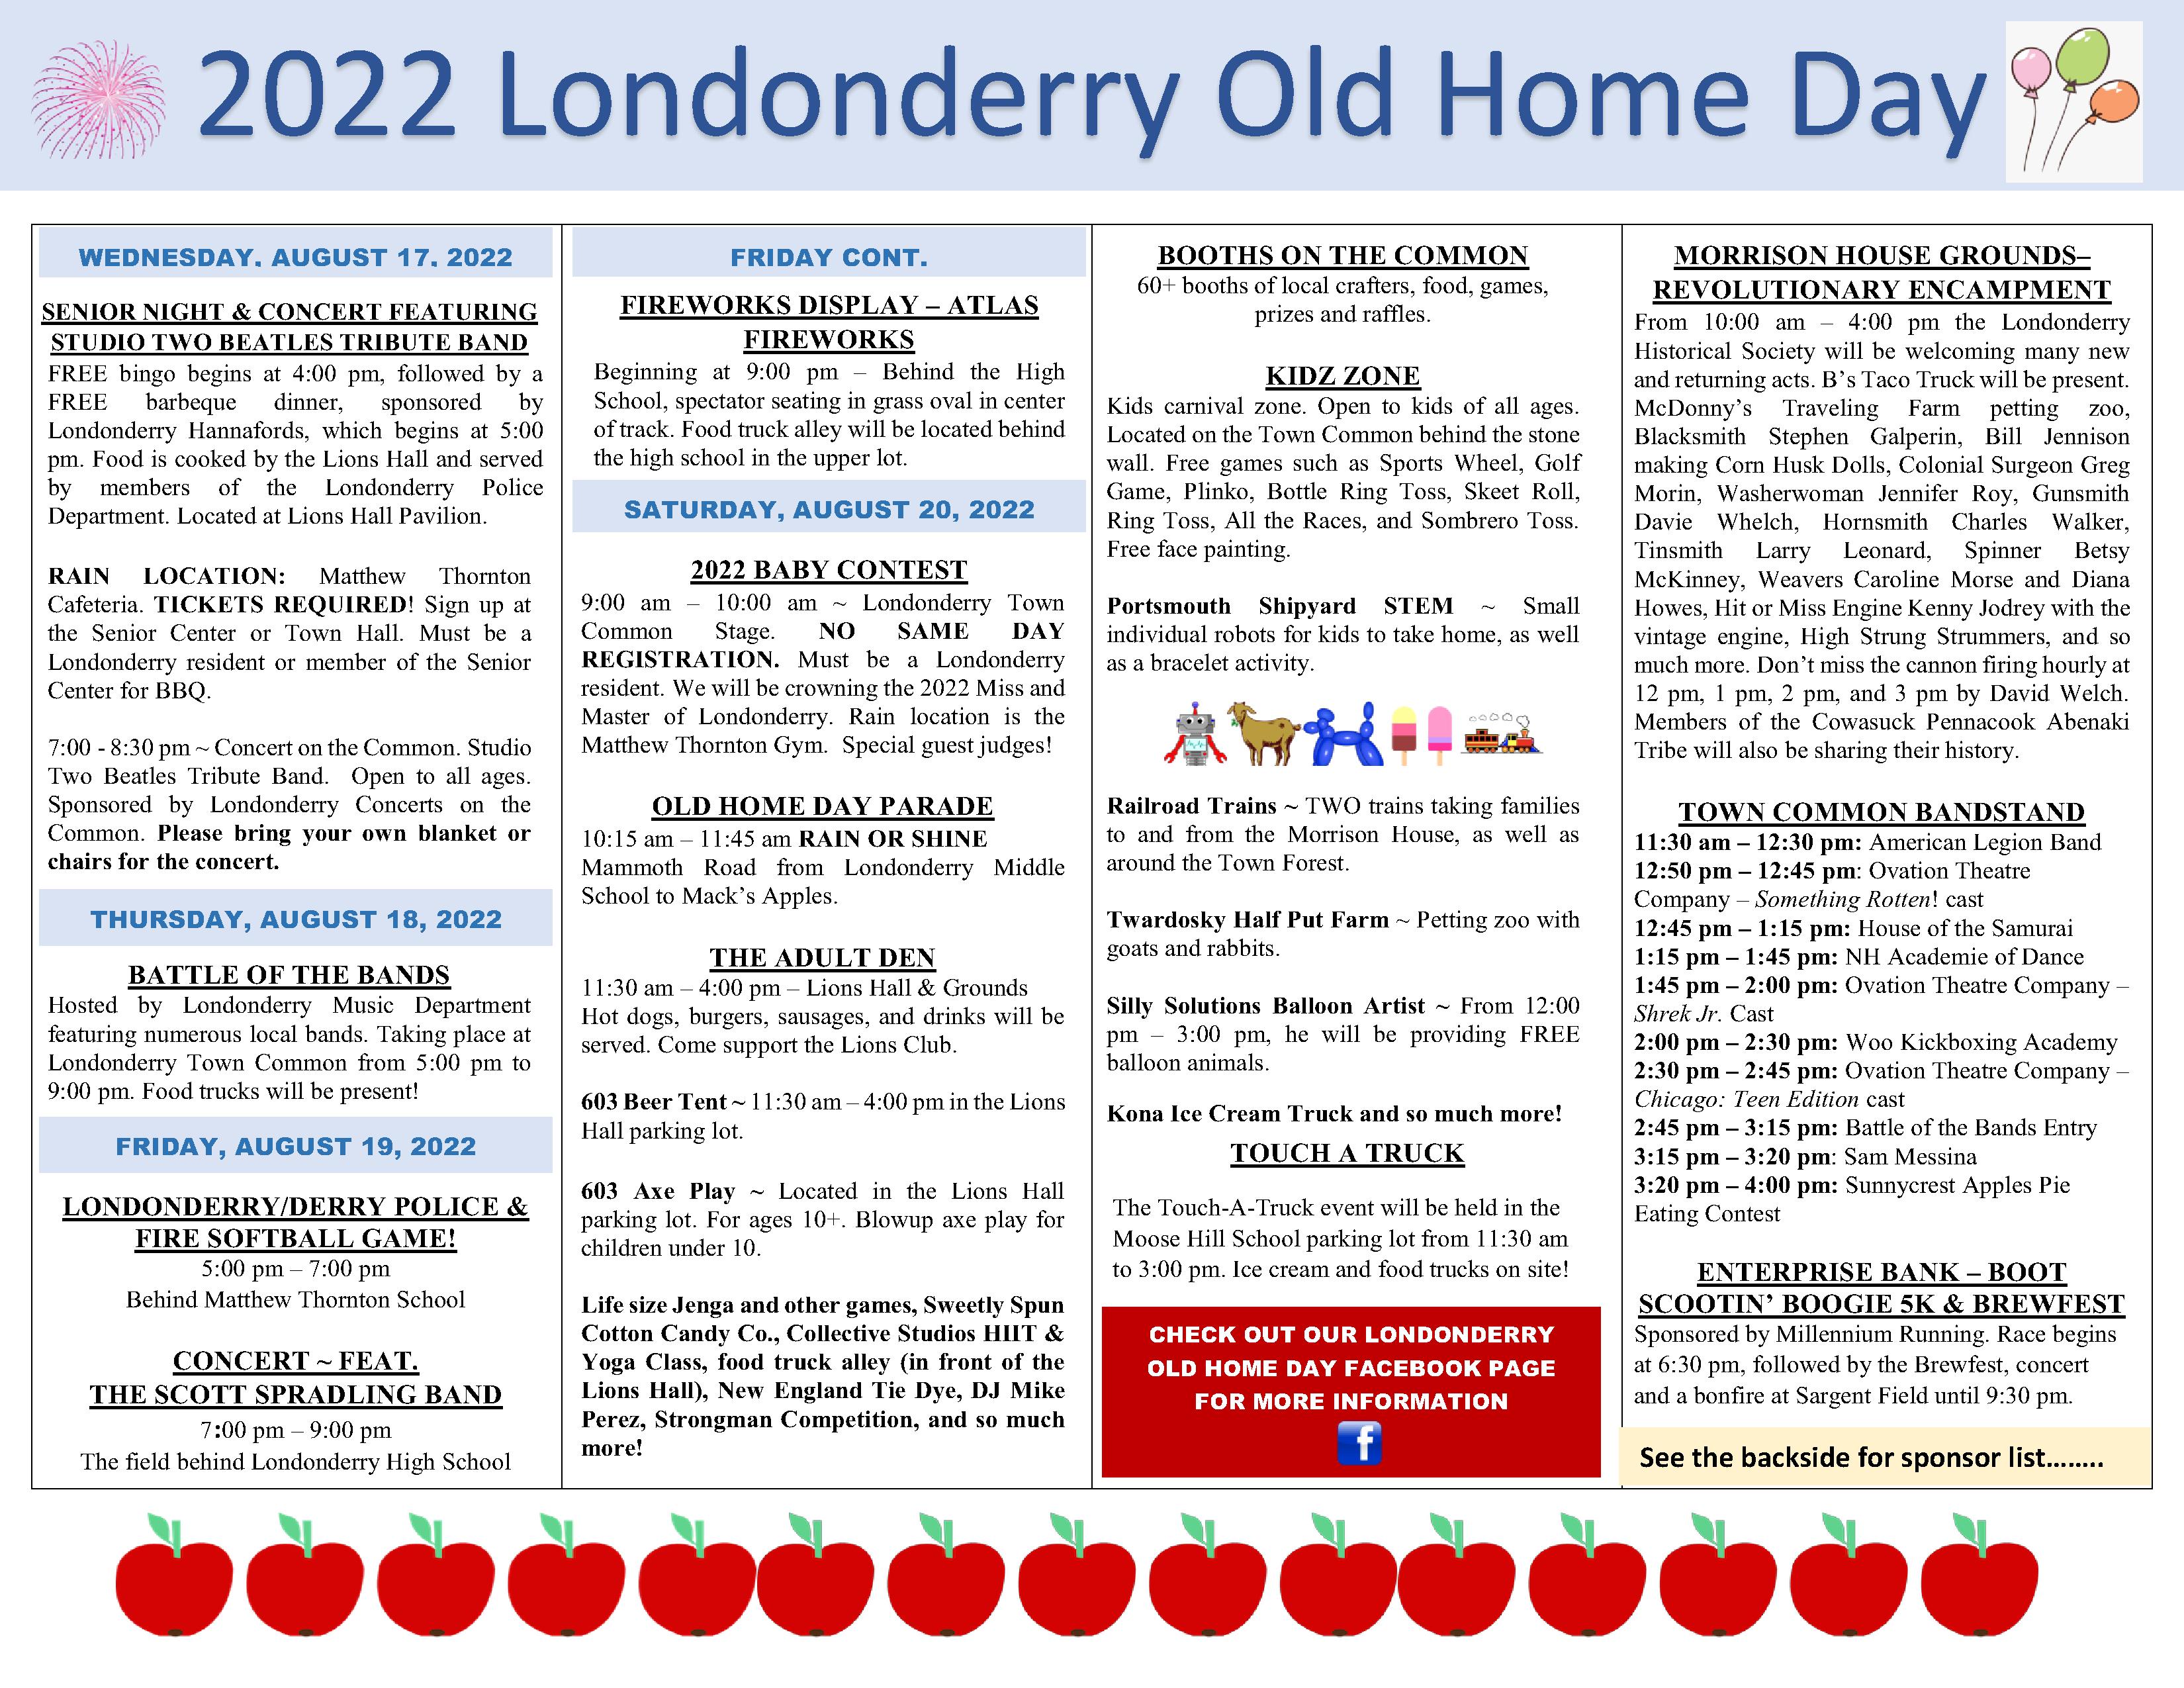 2022 LONDONDERRY OLD HOME DAY IN REVIEW Macaroni KID DerryHampstead